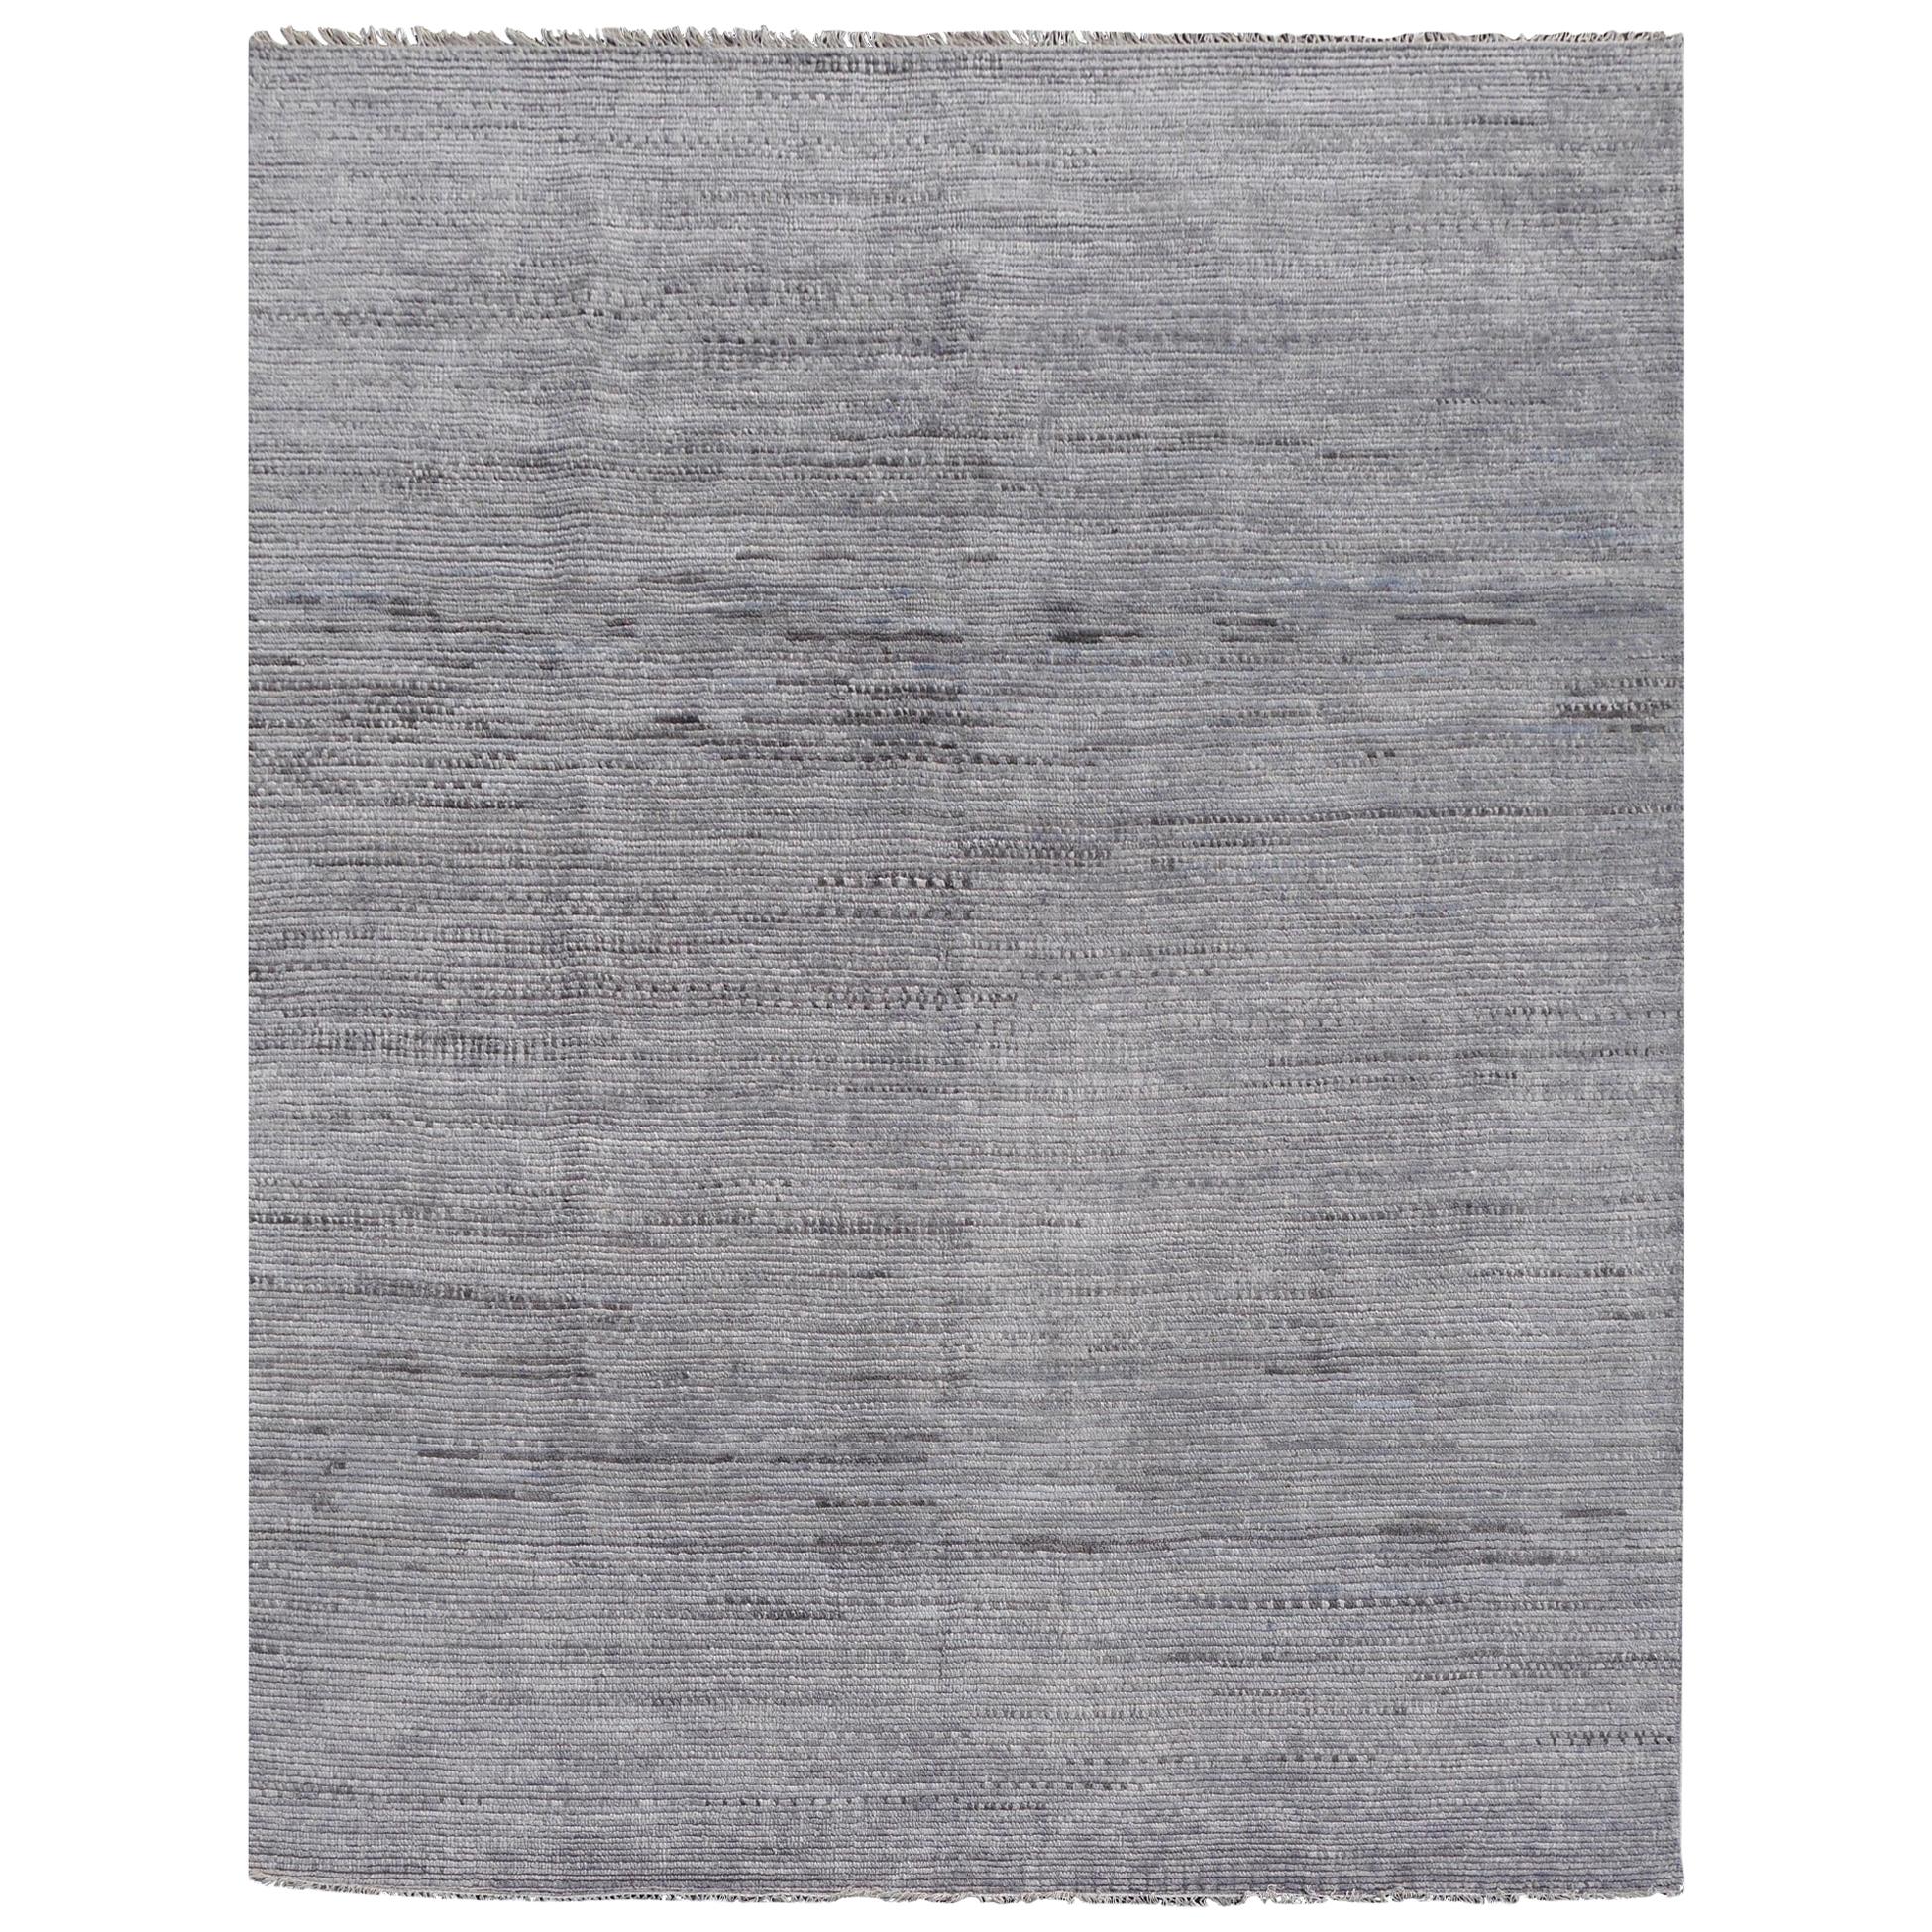 Modern Zagora Rug Wool Hand Knotted Gray and light Blue Moroccan Design Style